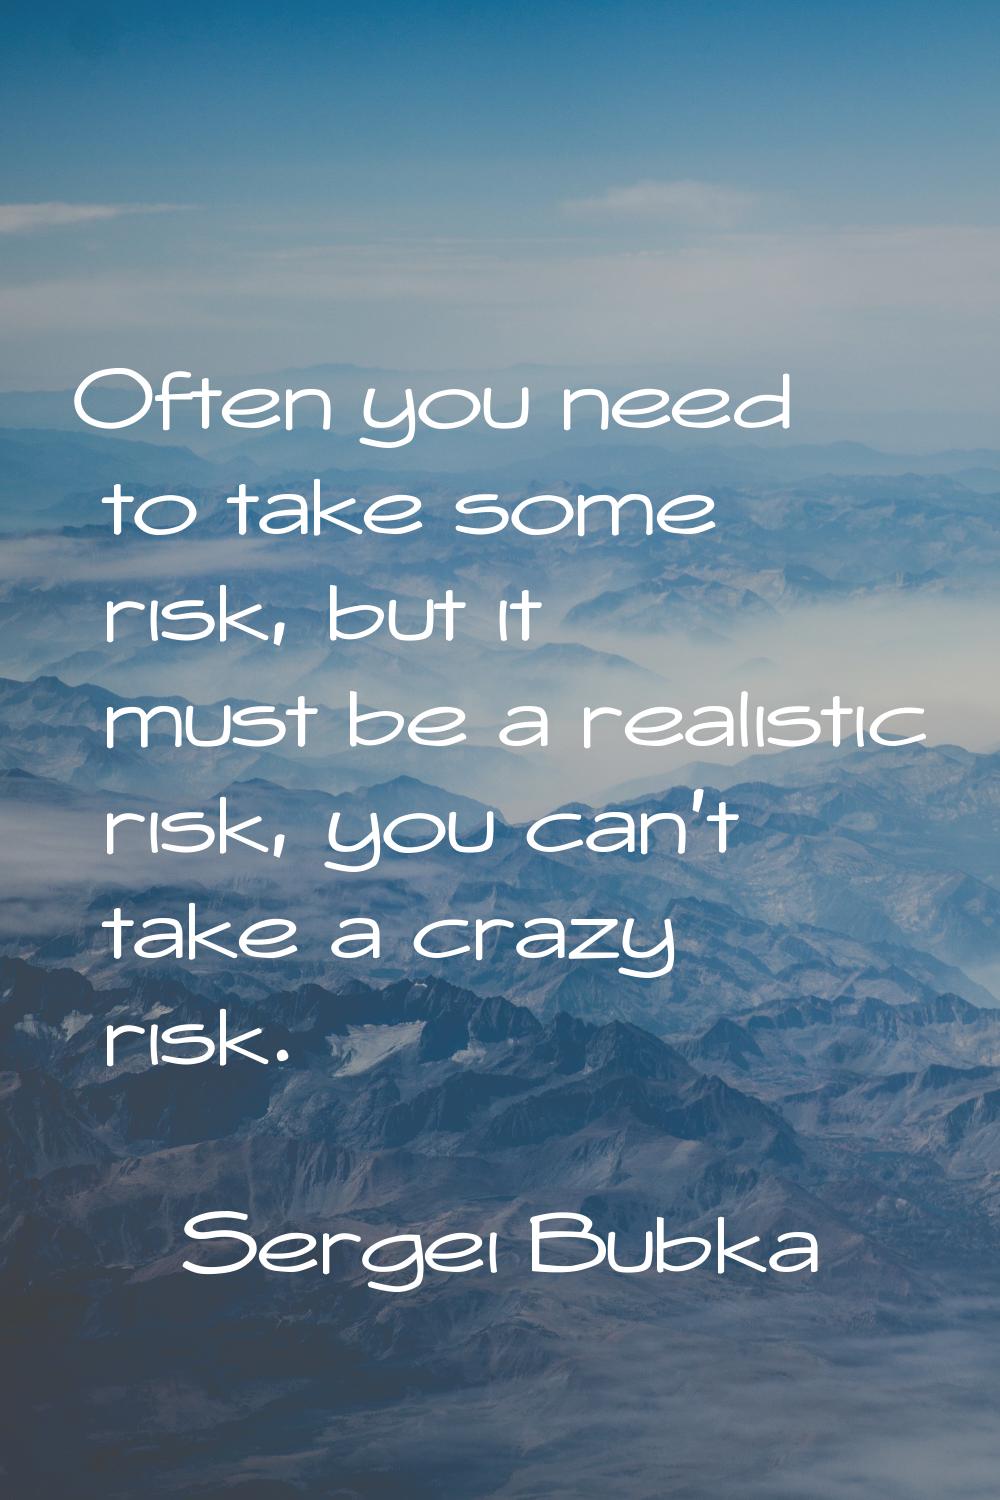 Often you need to take some risk, but it must be a realistic risk, you can't take a crazy risk.